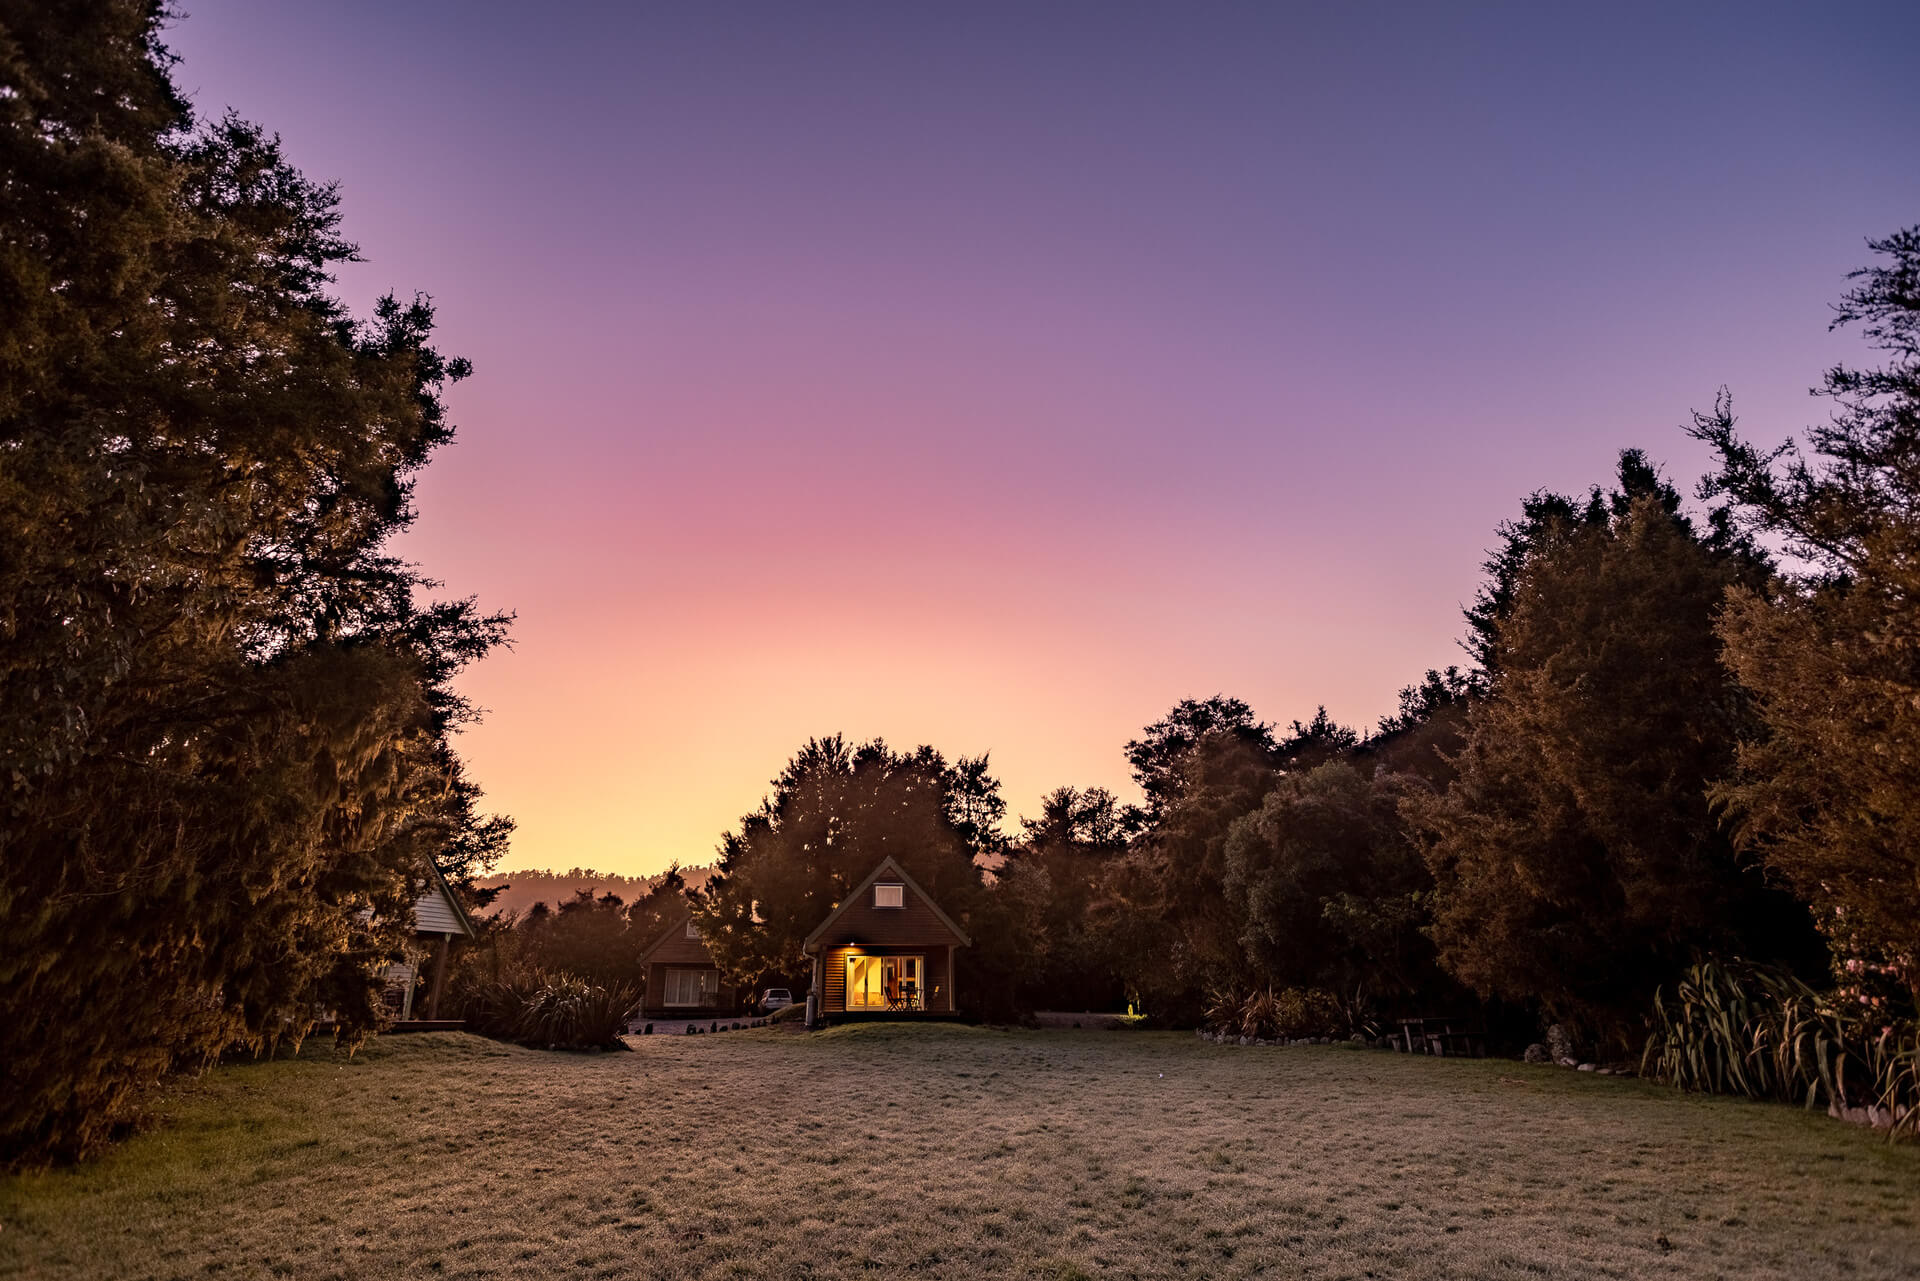 Kahere Retreat chalet and trees with pink skies at sunset